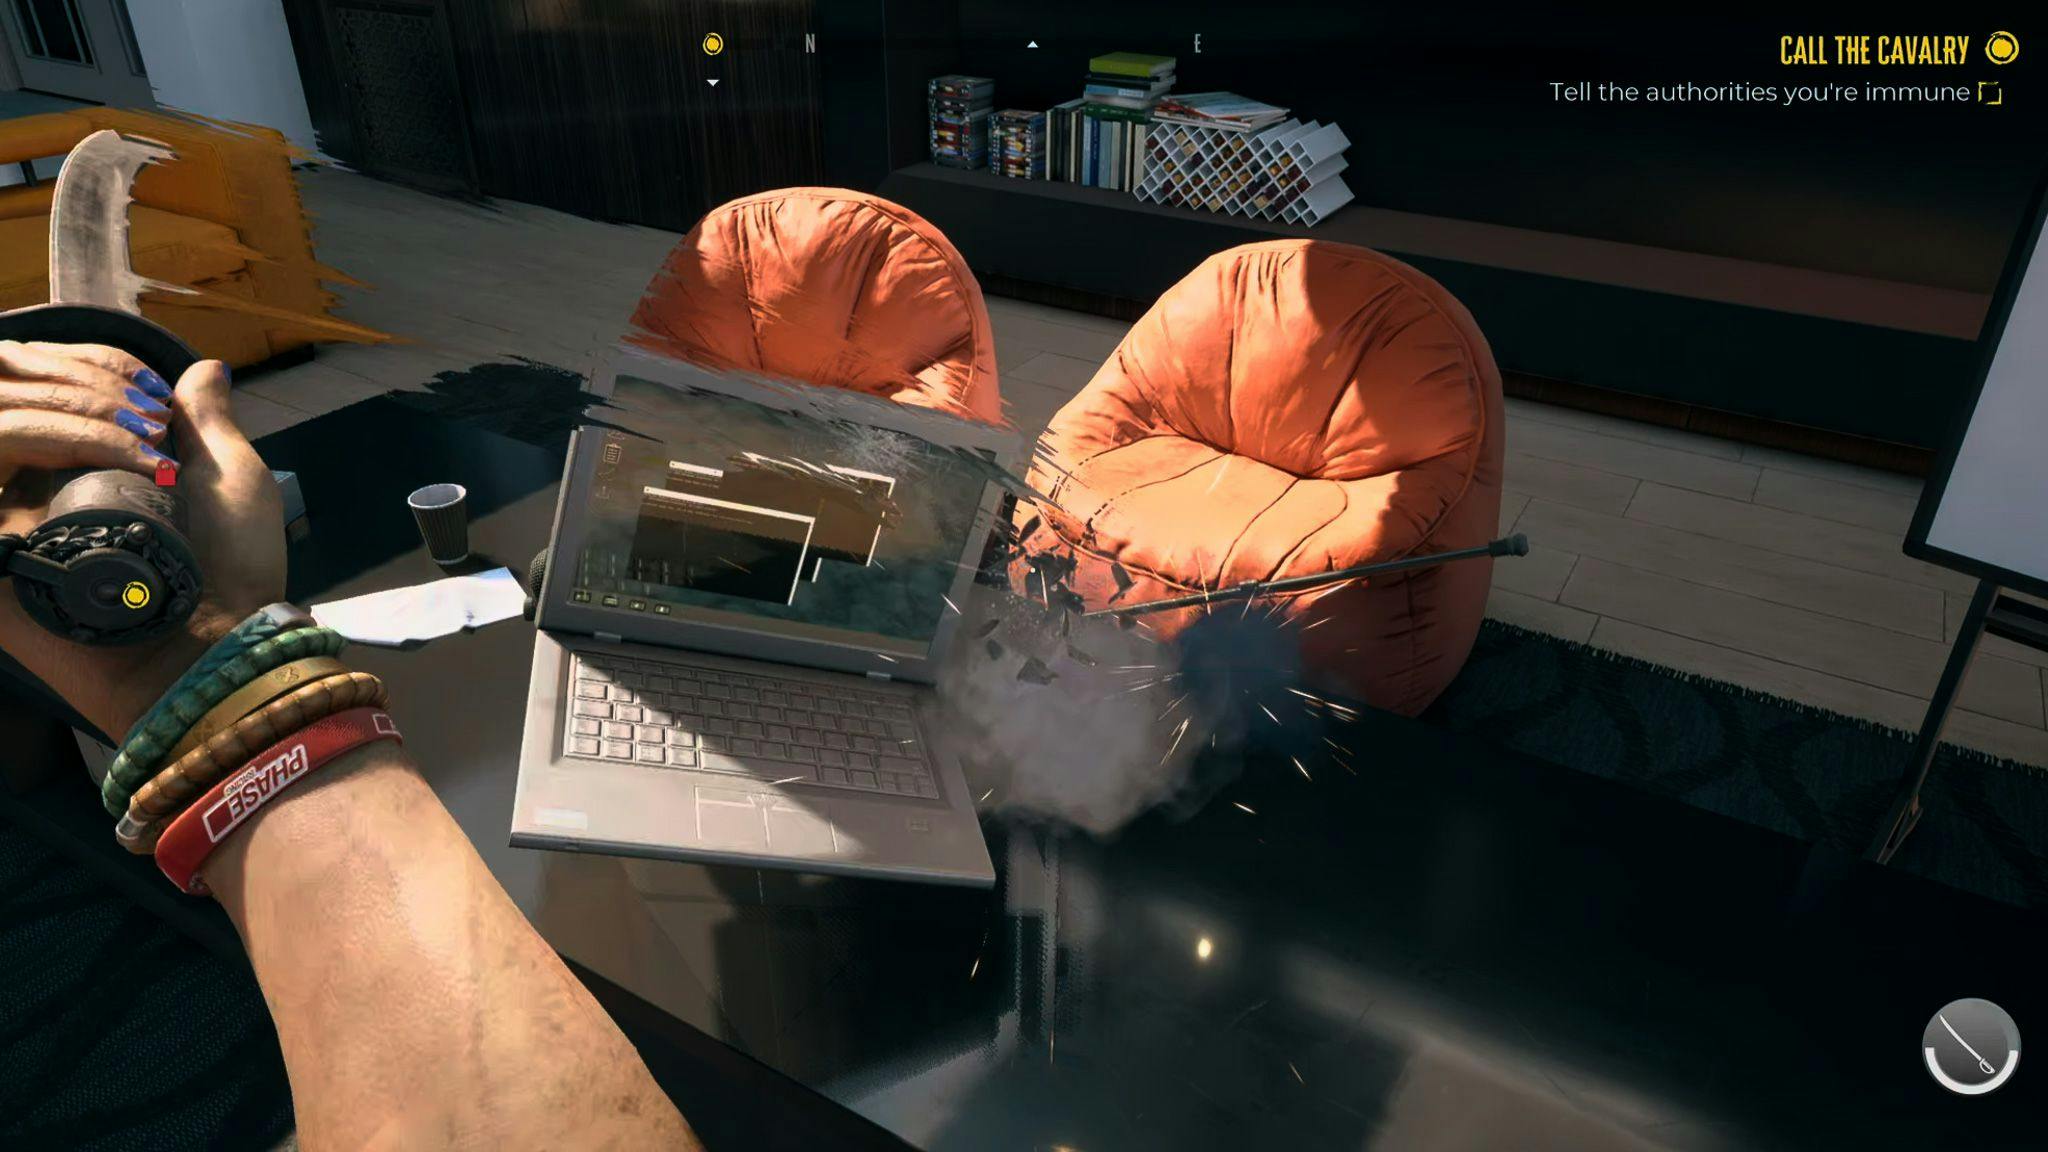 A screenshot from Dead Island 2 depicting a hand holding a sword slicing a laptop. Two orange armchairs in the background.